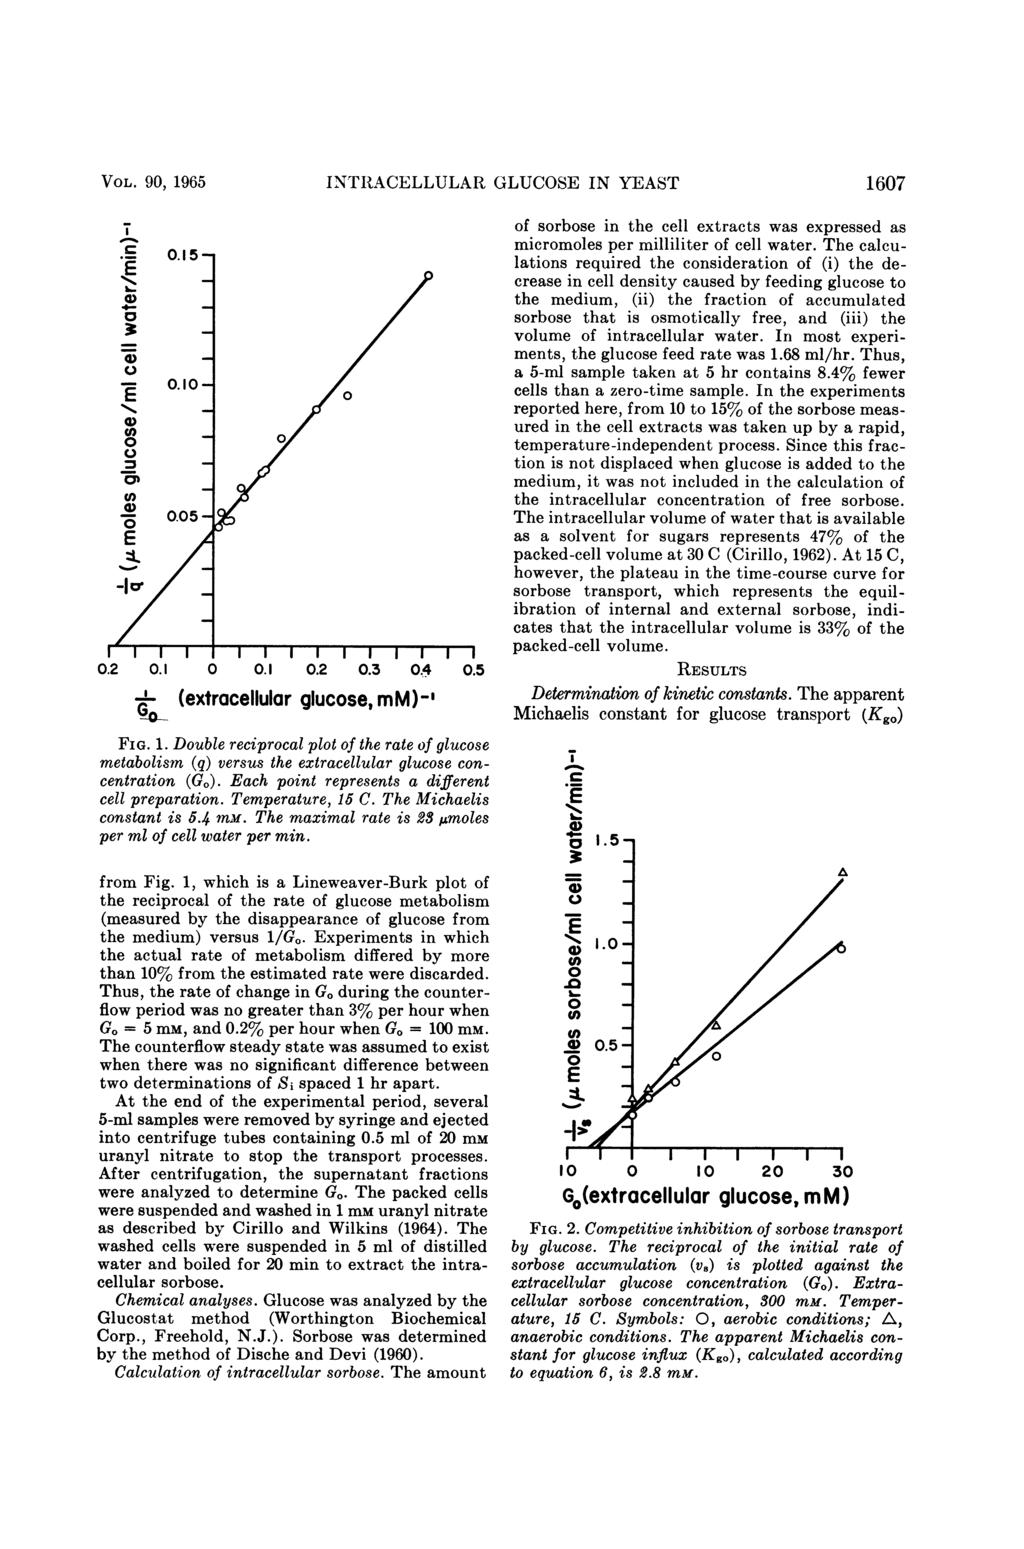 VOL. 9, 1965 INTRACLLULAR GLUCOS IN YAST 167 T C I 4-7o U) -.2.1.1.2.3.4.5 (extracellular glucose, mm)-' FIG. 1. Double reciprocal plot of the rate of glucose metabolism (q) versus the extracellular glucose concentration (G).